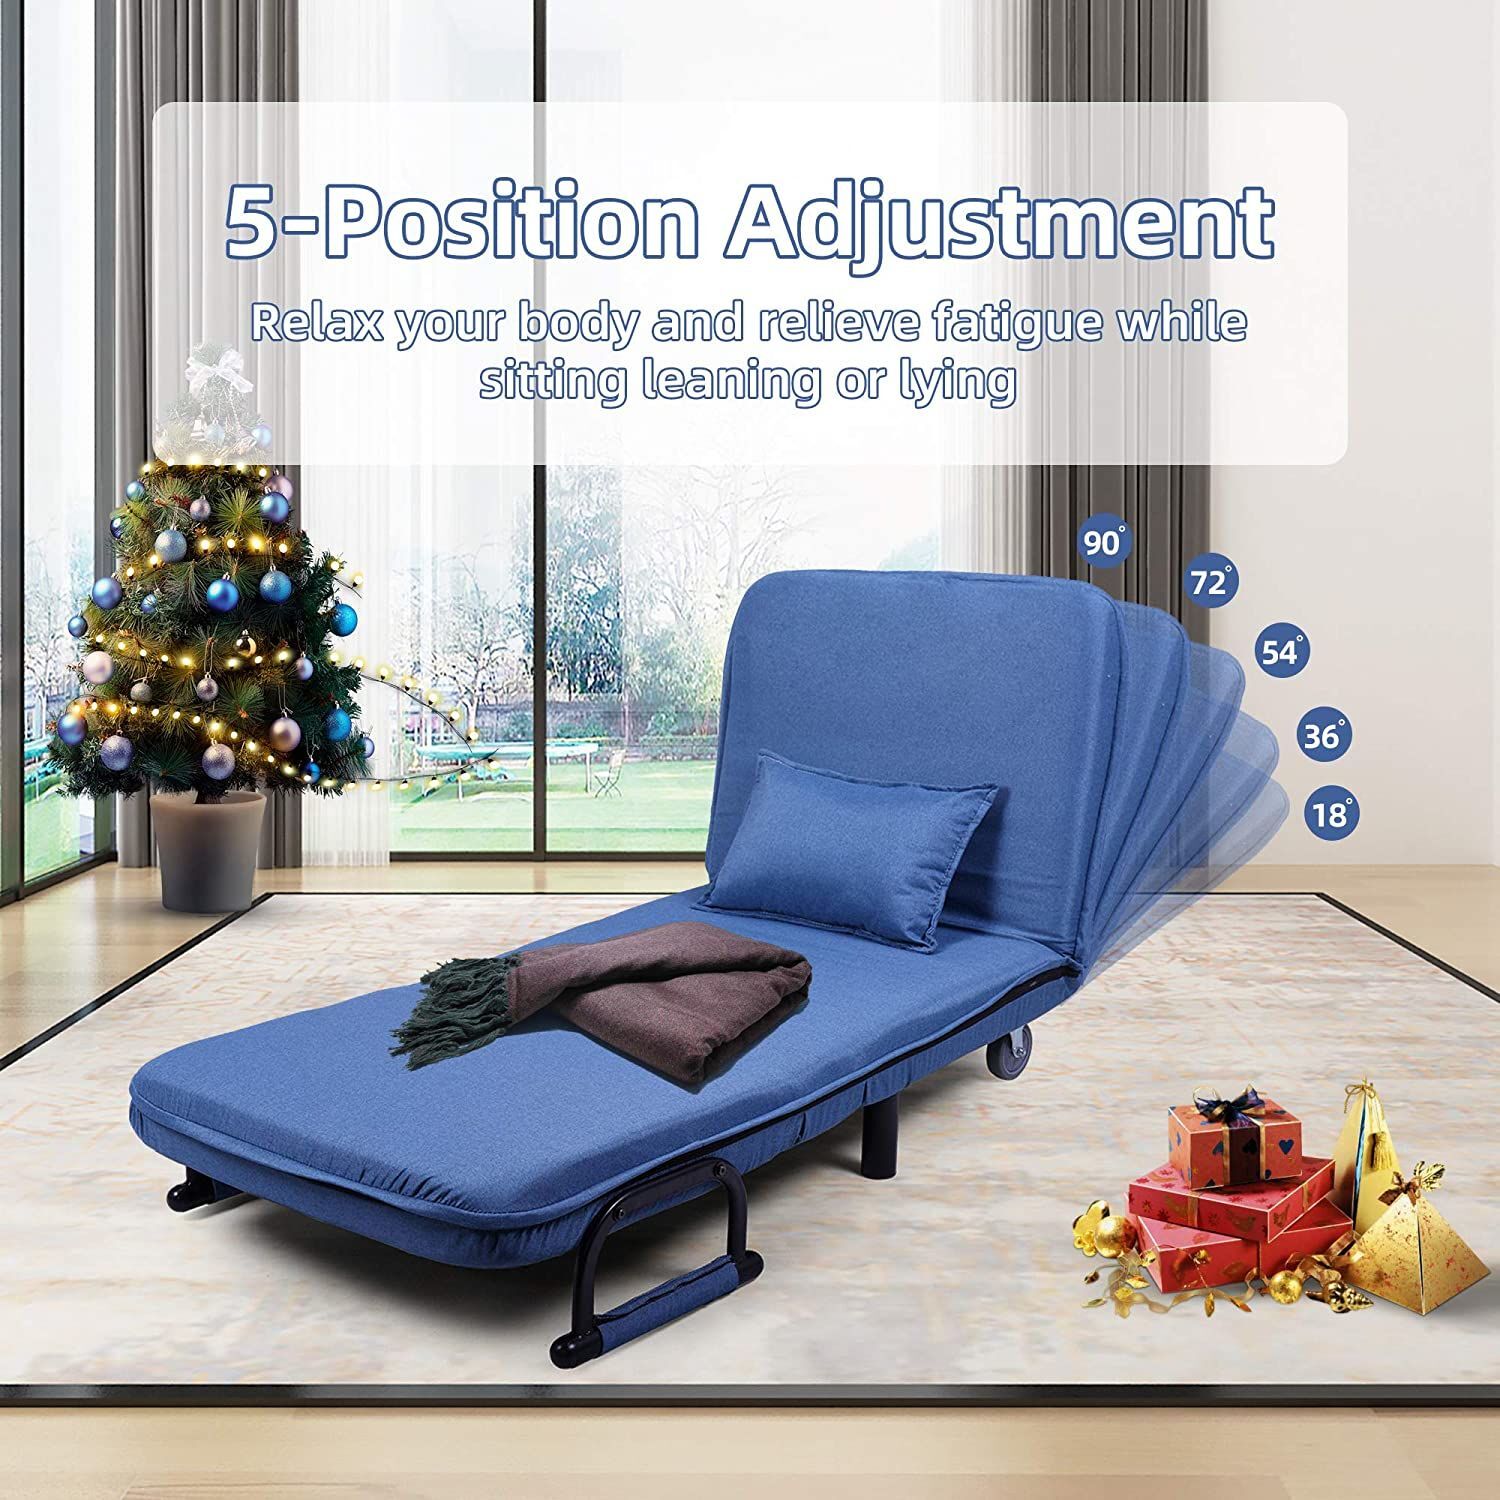  Giantex Convertible Sofa Bed, Floor Couch with 2 Pillows, PU  Leather Loveseat Recliner, Folding Lazy Sleeper Sofa, 5 Position, Video Gaming  Sofa Mattress for Reading Living Room Bedroom : Home & Kitchen